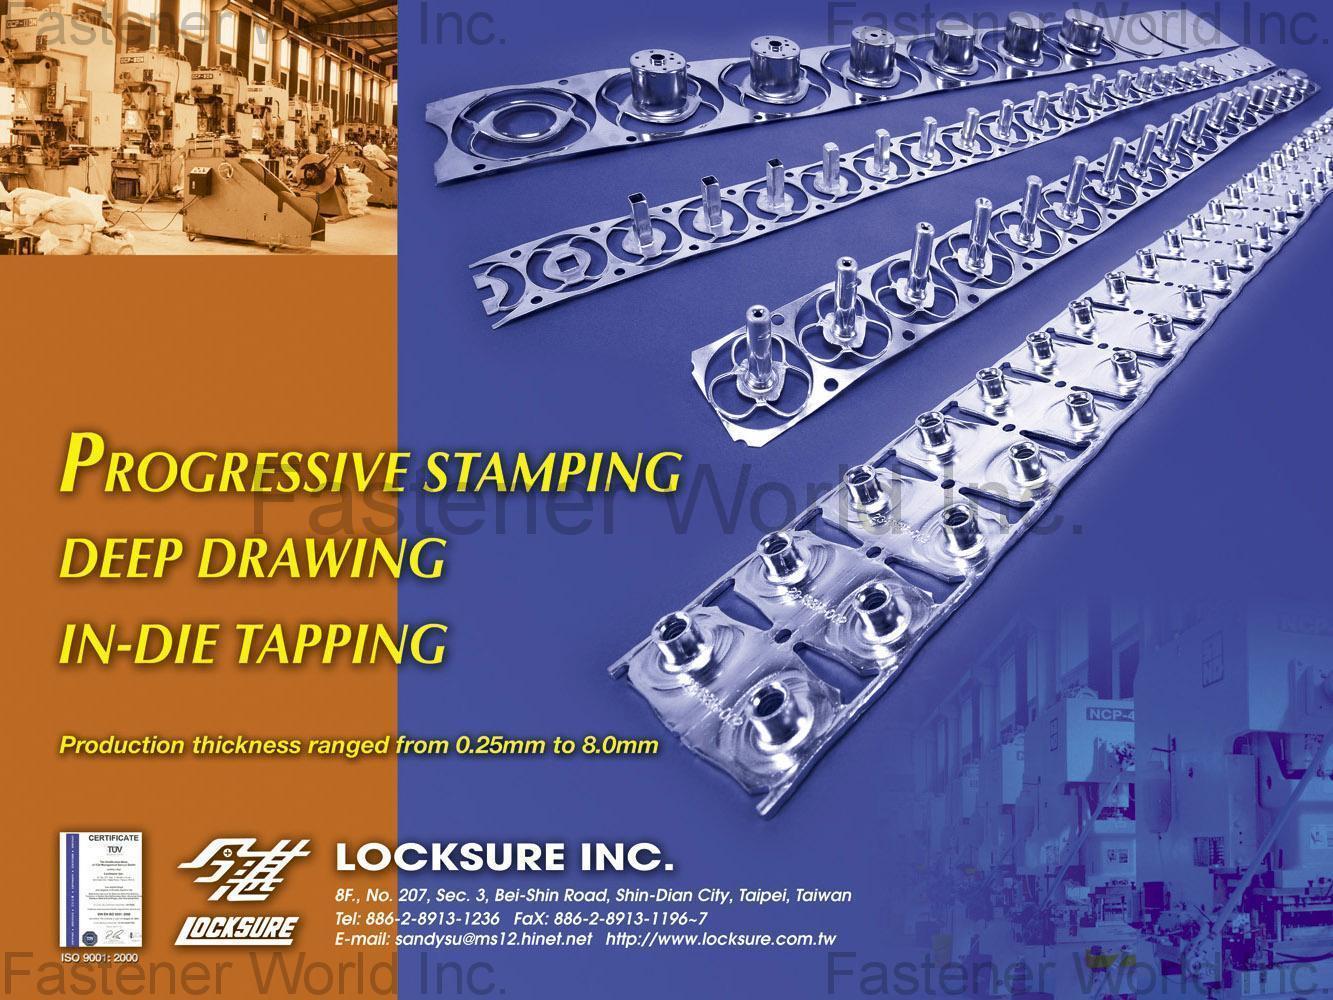 LOCKSURE INC.  , Progressive Stamping Deep Drawing In-Die Tapping , Industrial Robots & Accessories